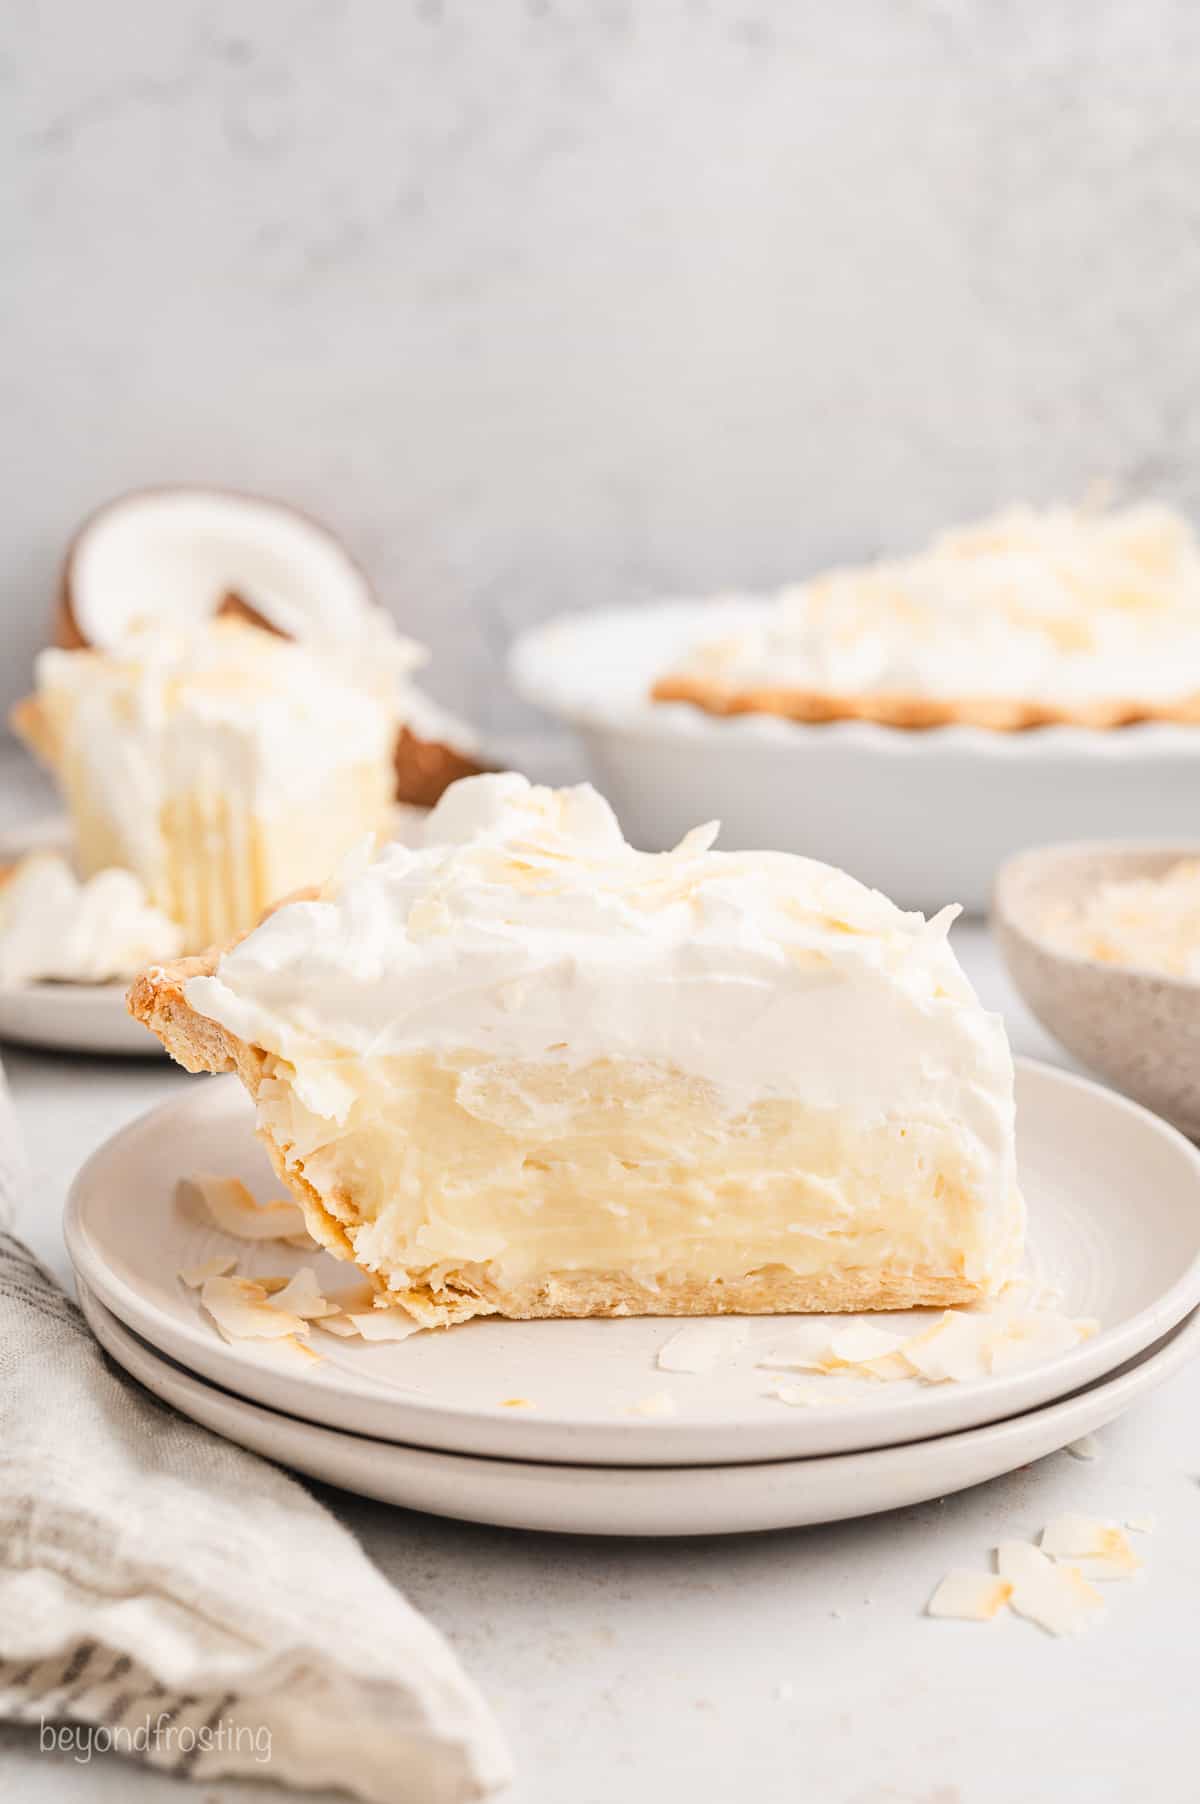 Side view of a slice of coconut cream pie on a plate, with the rest of the pie in the background.